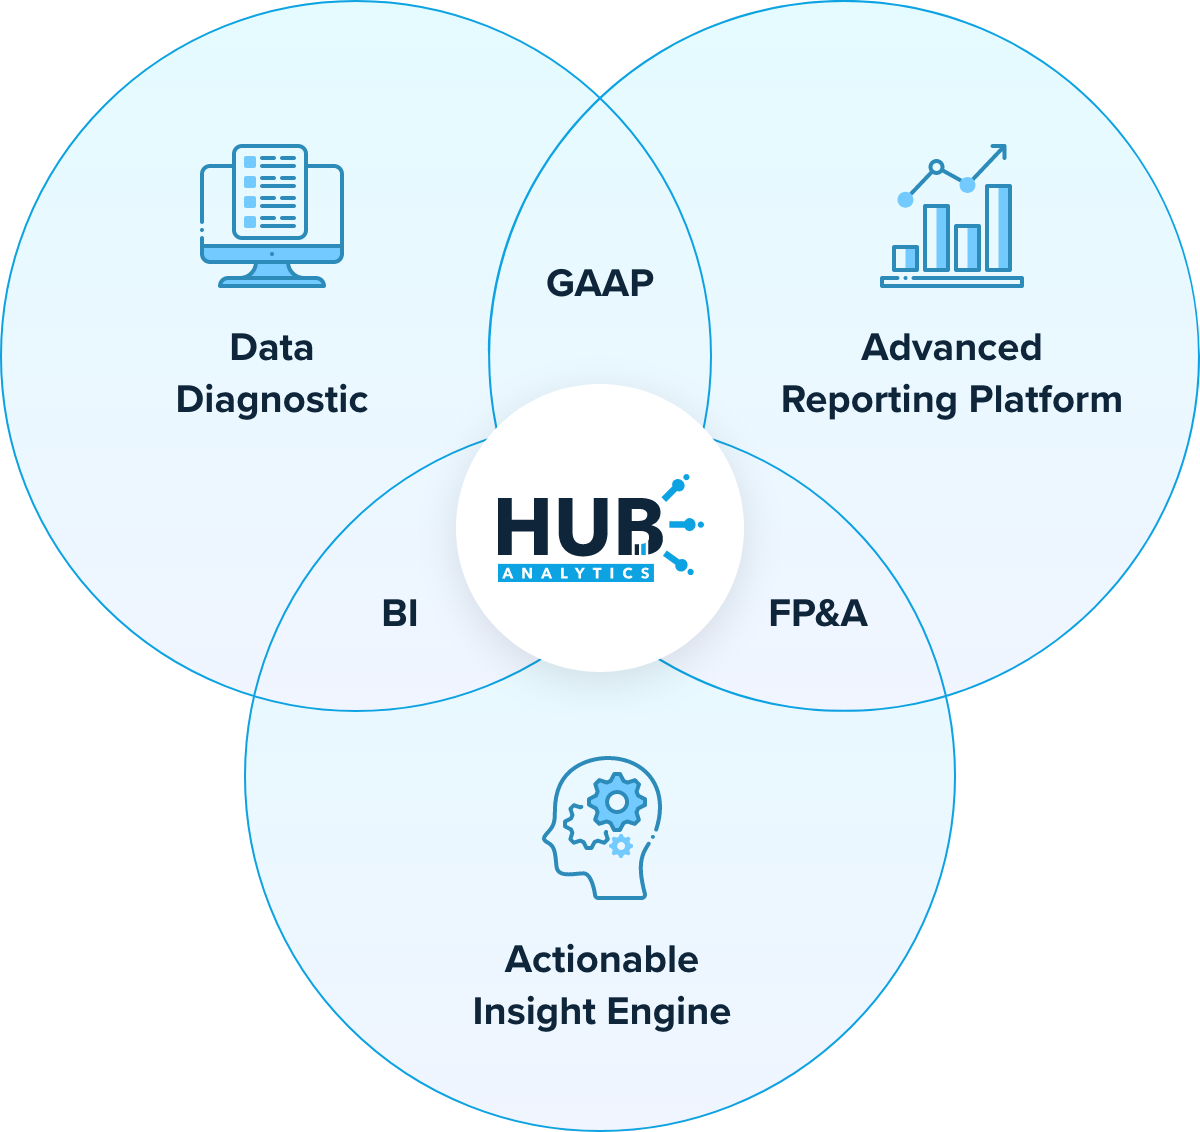 venn diagram. data diagnostic, advanced reporting platform, actionable insight engine in different sections